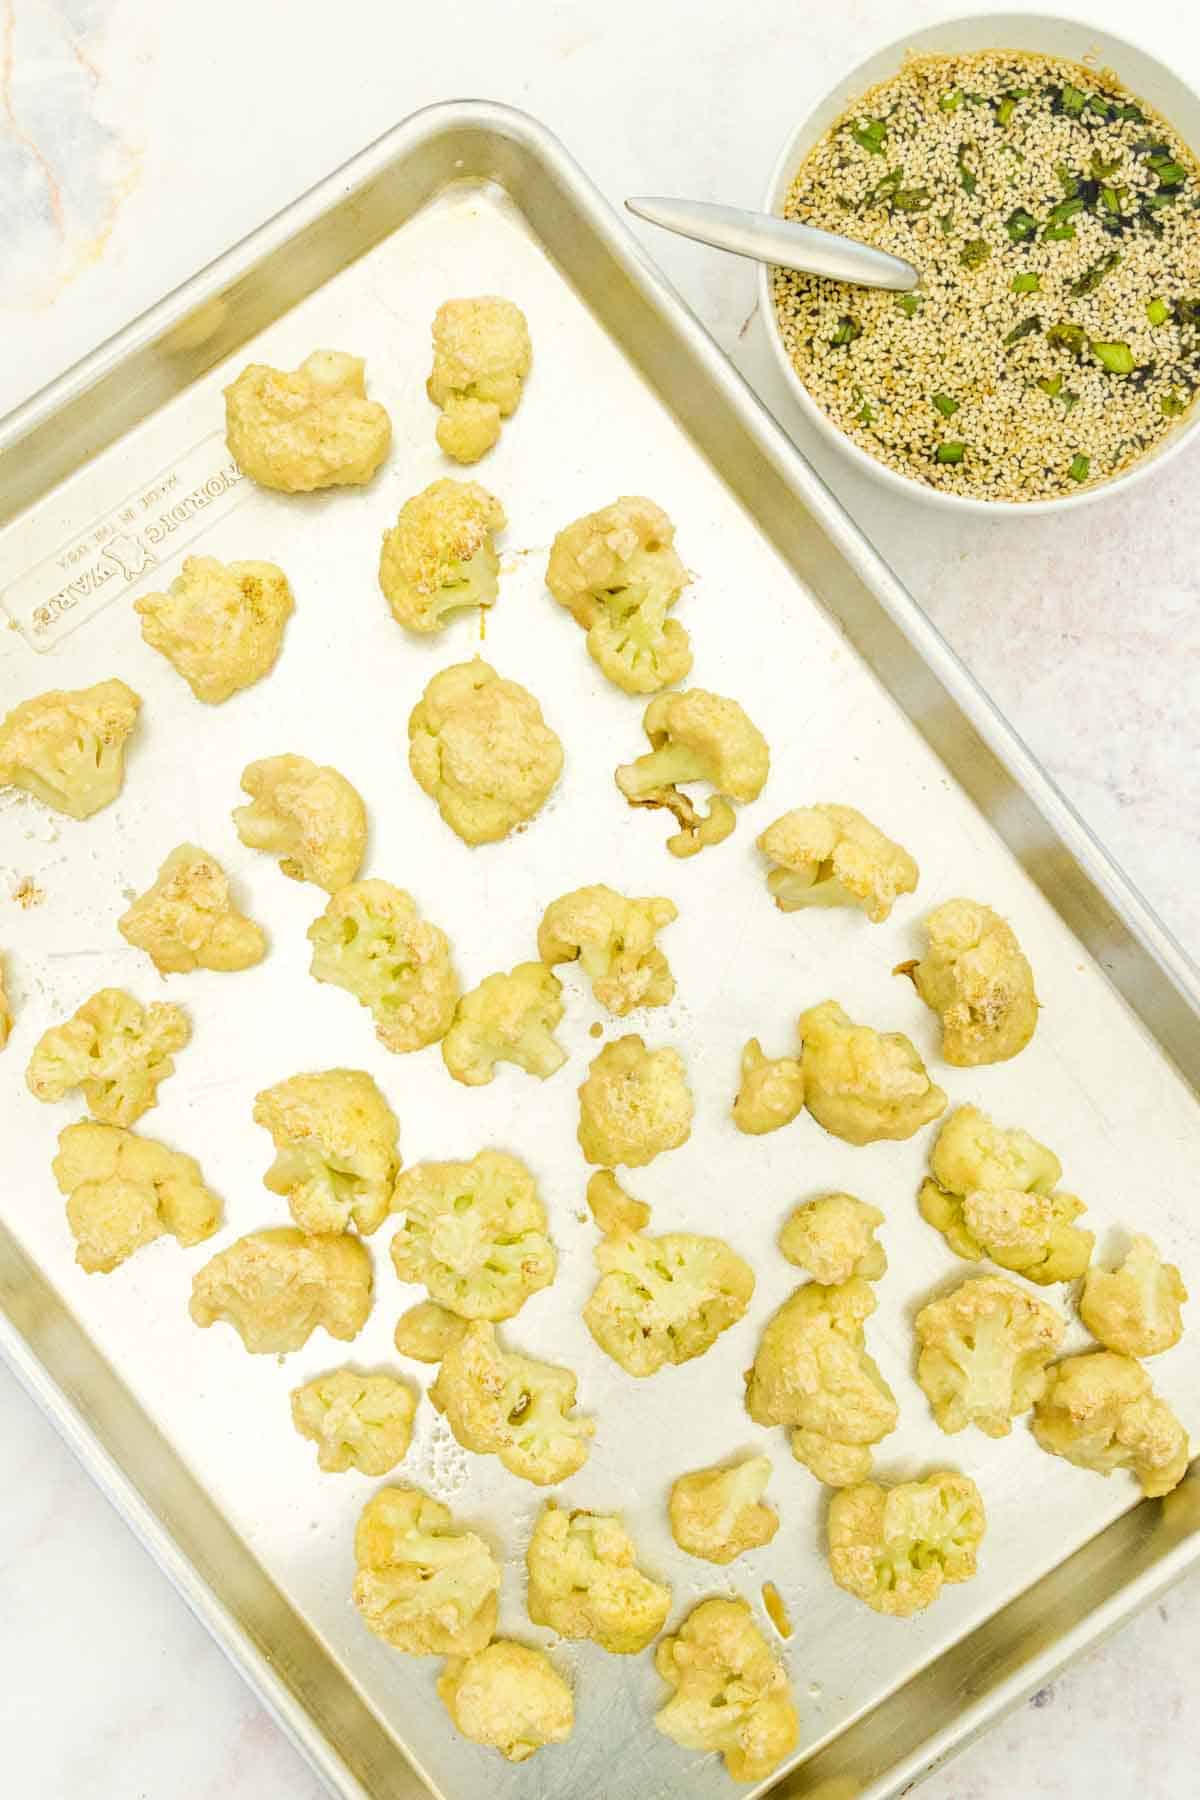 Partially baked cauliflower bites on a baking sheet with the bowl of sesame glaze next to it.